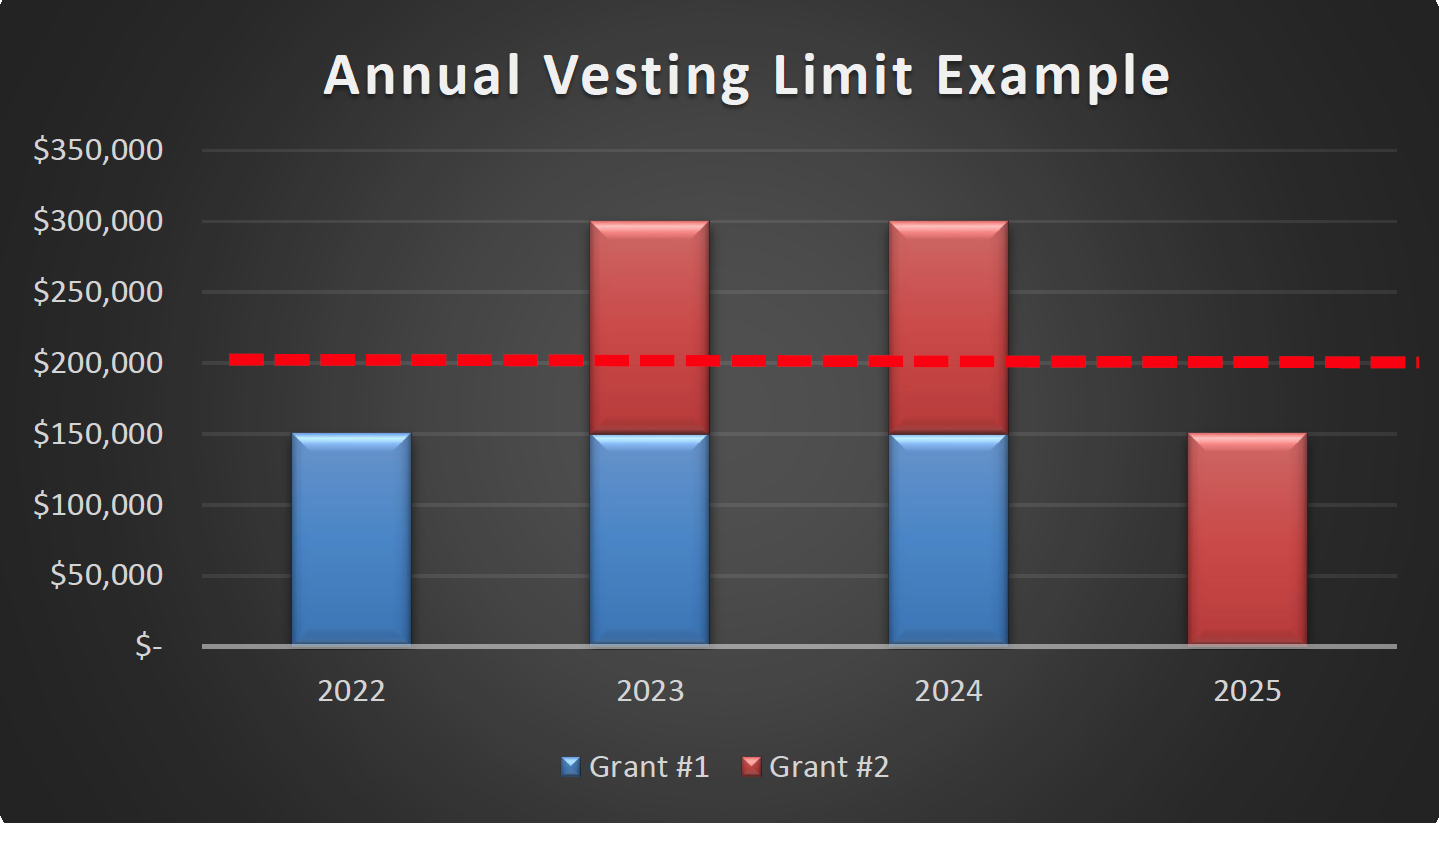 EY - Annual Vesting Limit Example chart